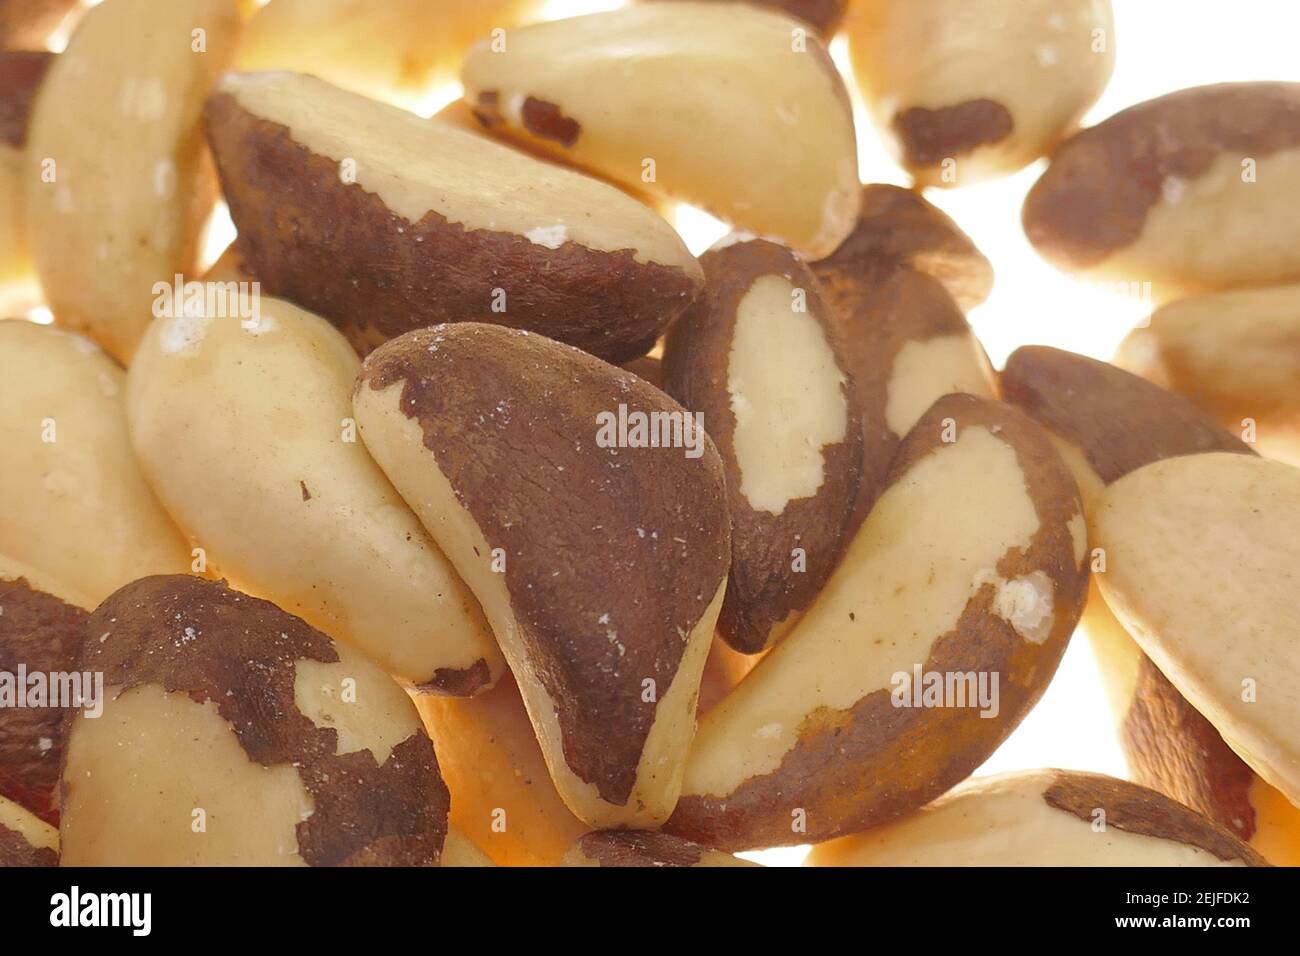 Brazil nut close-up on white background.Healthy fats. Nuts and seeds. A healthy snack. Healthy fats and proteins. Vegetarian Food Ingredient Stock Photo